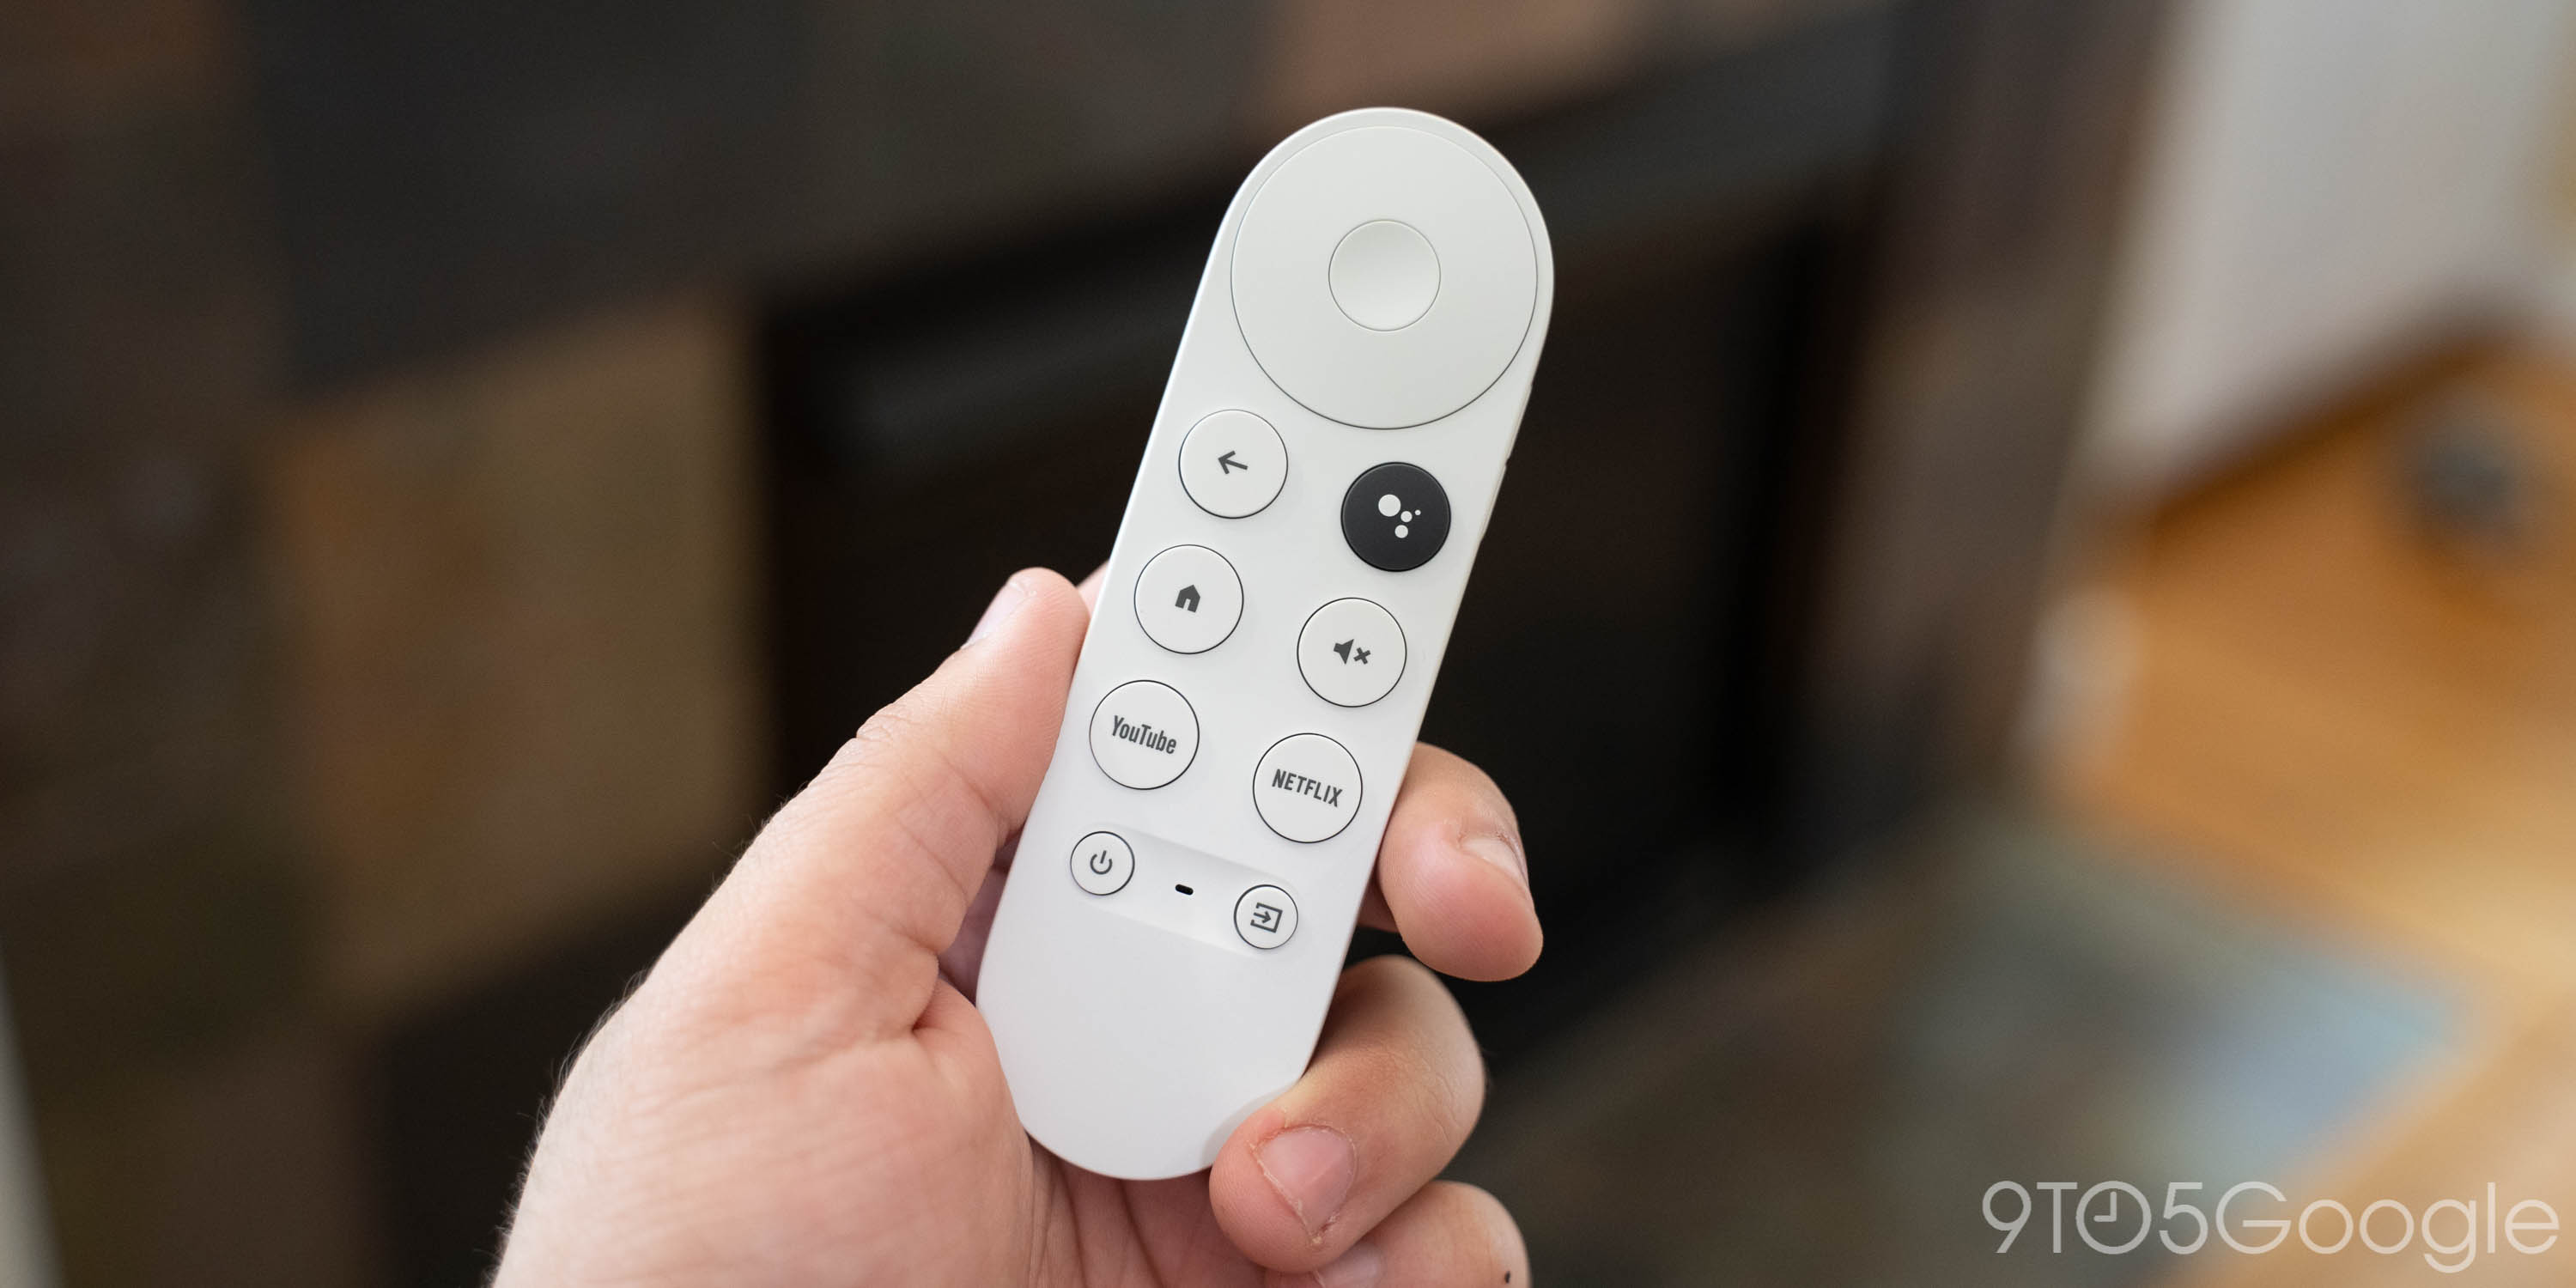 Chromecast remote's can be remapped - 9to5Google